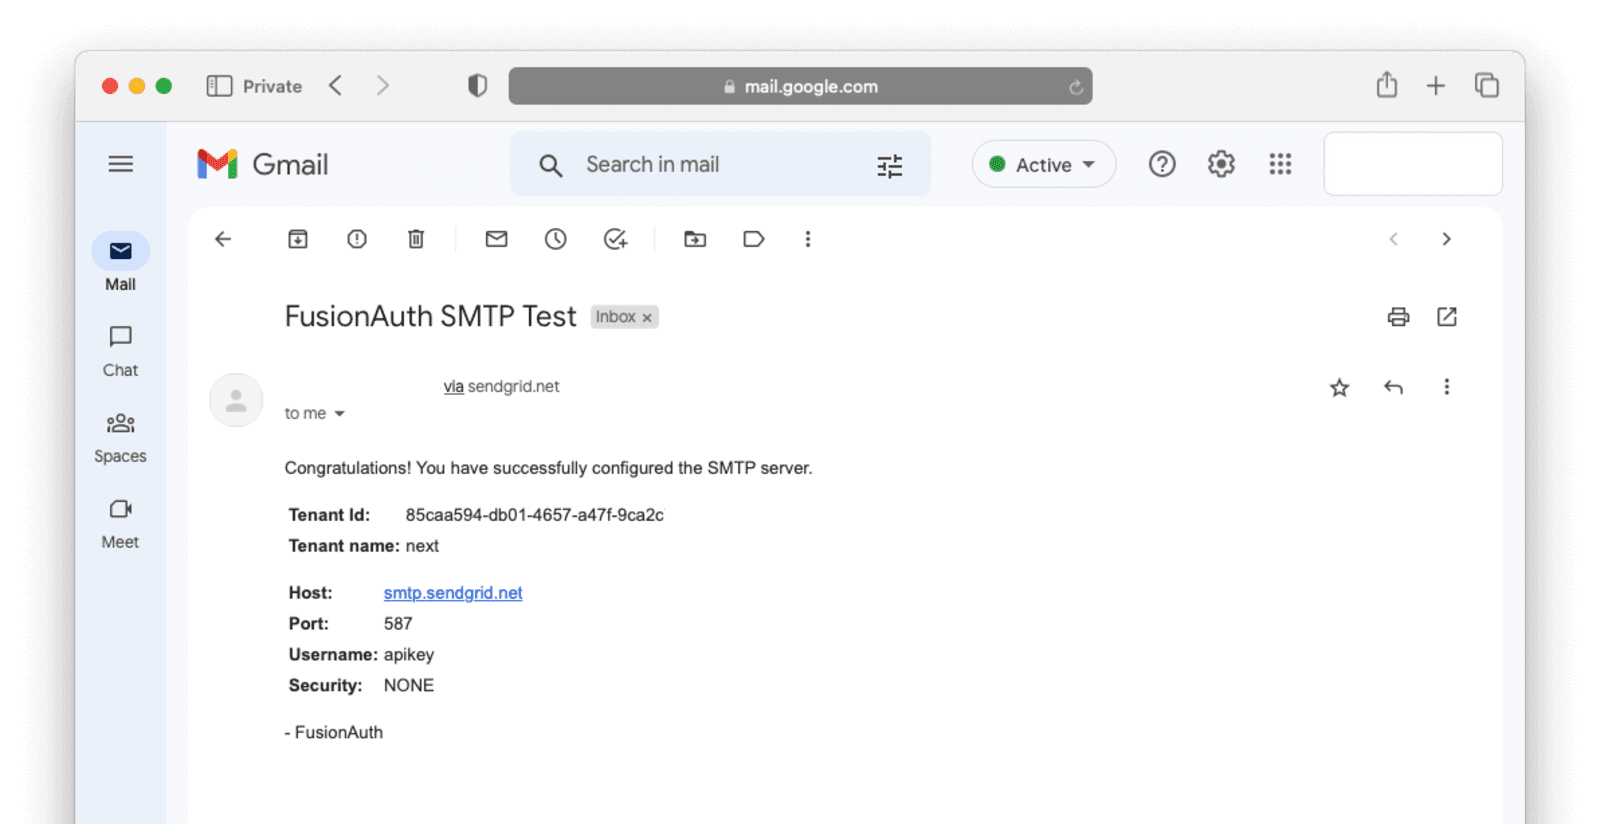 A test email that was successfully sent via FusionAuth